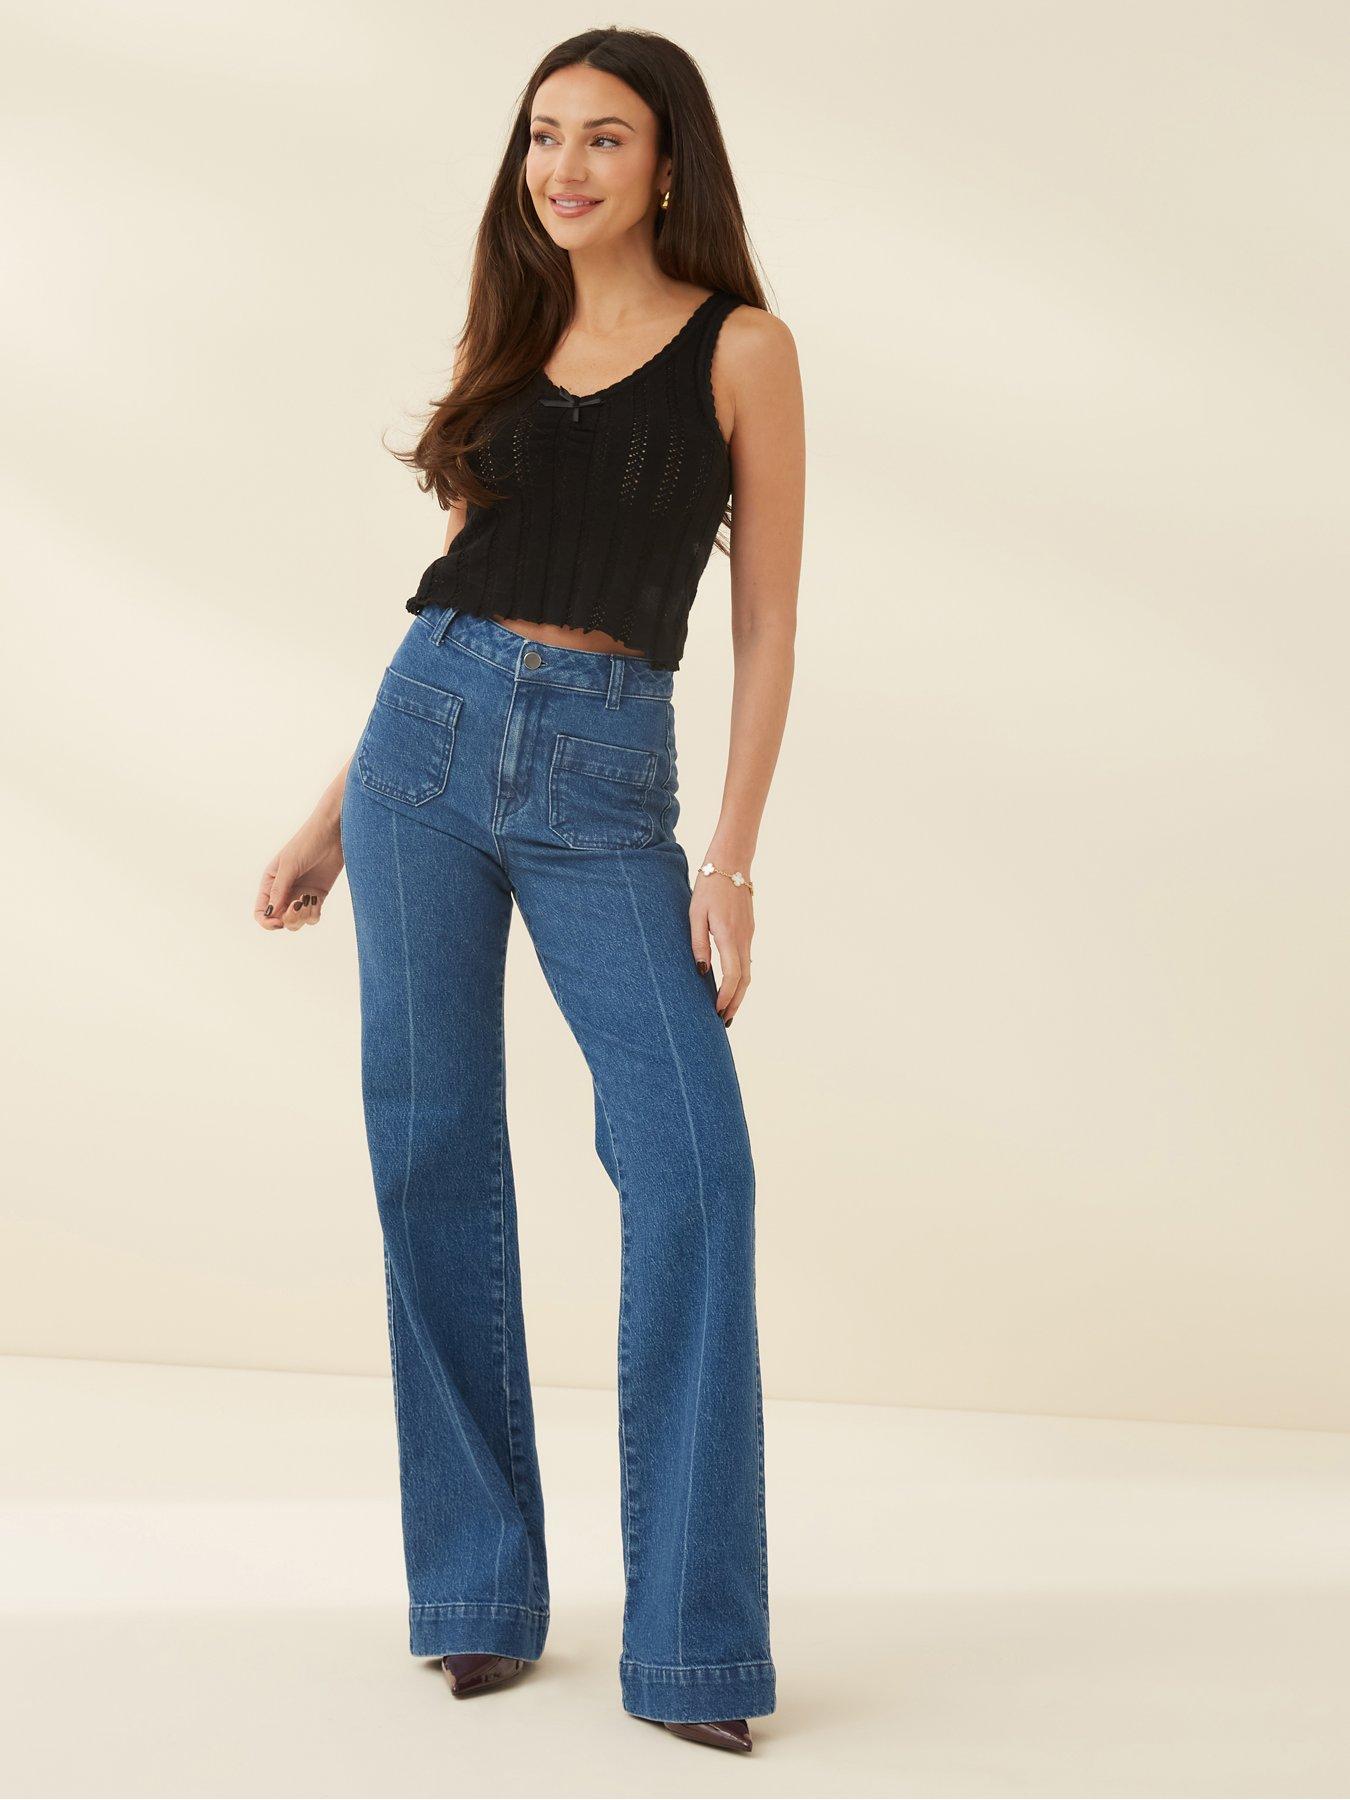 PacSun - Jeans as comfortable as your leggings. The new Push Up Jegging  features super stretch fabric and a push-up design for everyday comfort.  Shop denim now at Buy One, Get One